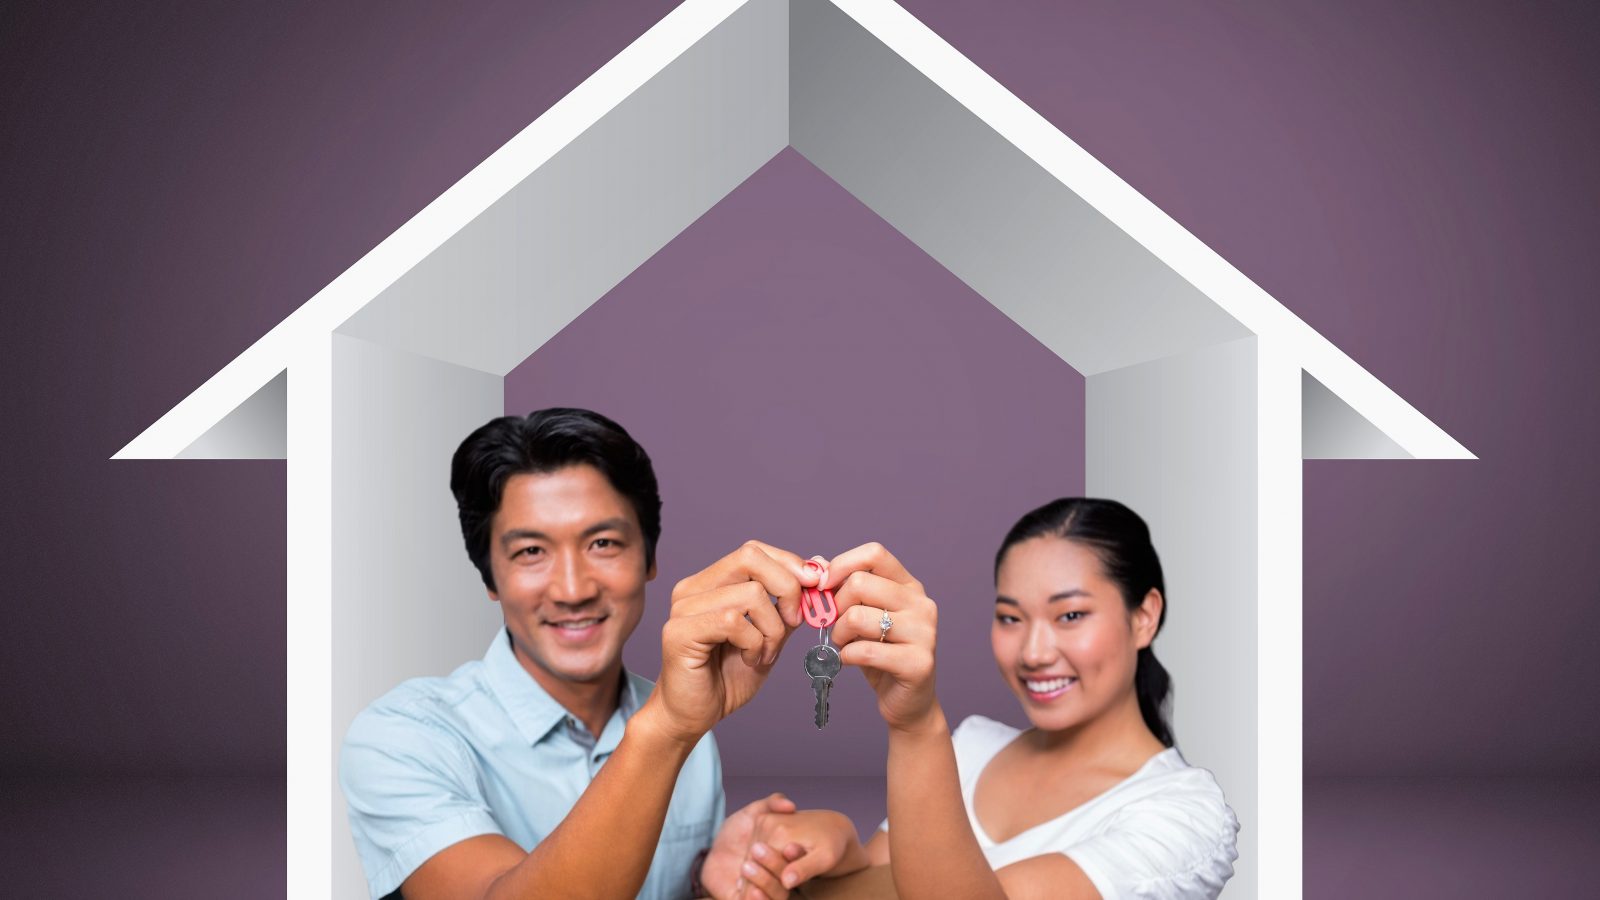 Marketing California Home on Reaching the Right Buyers